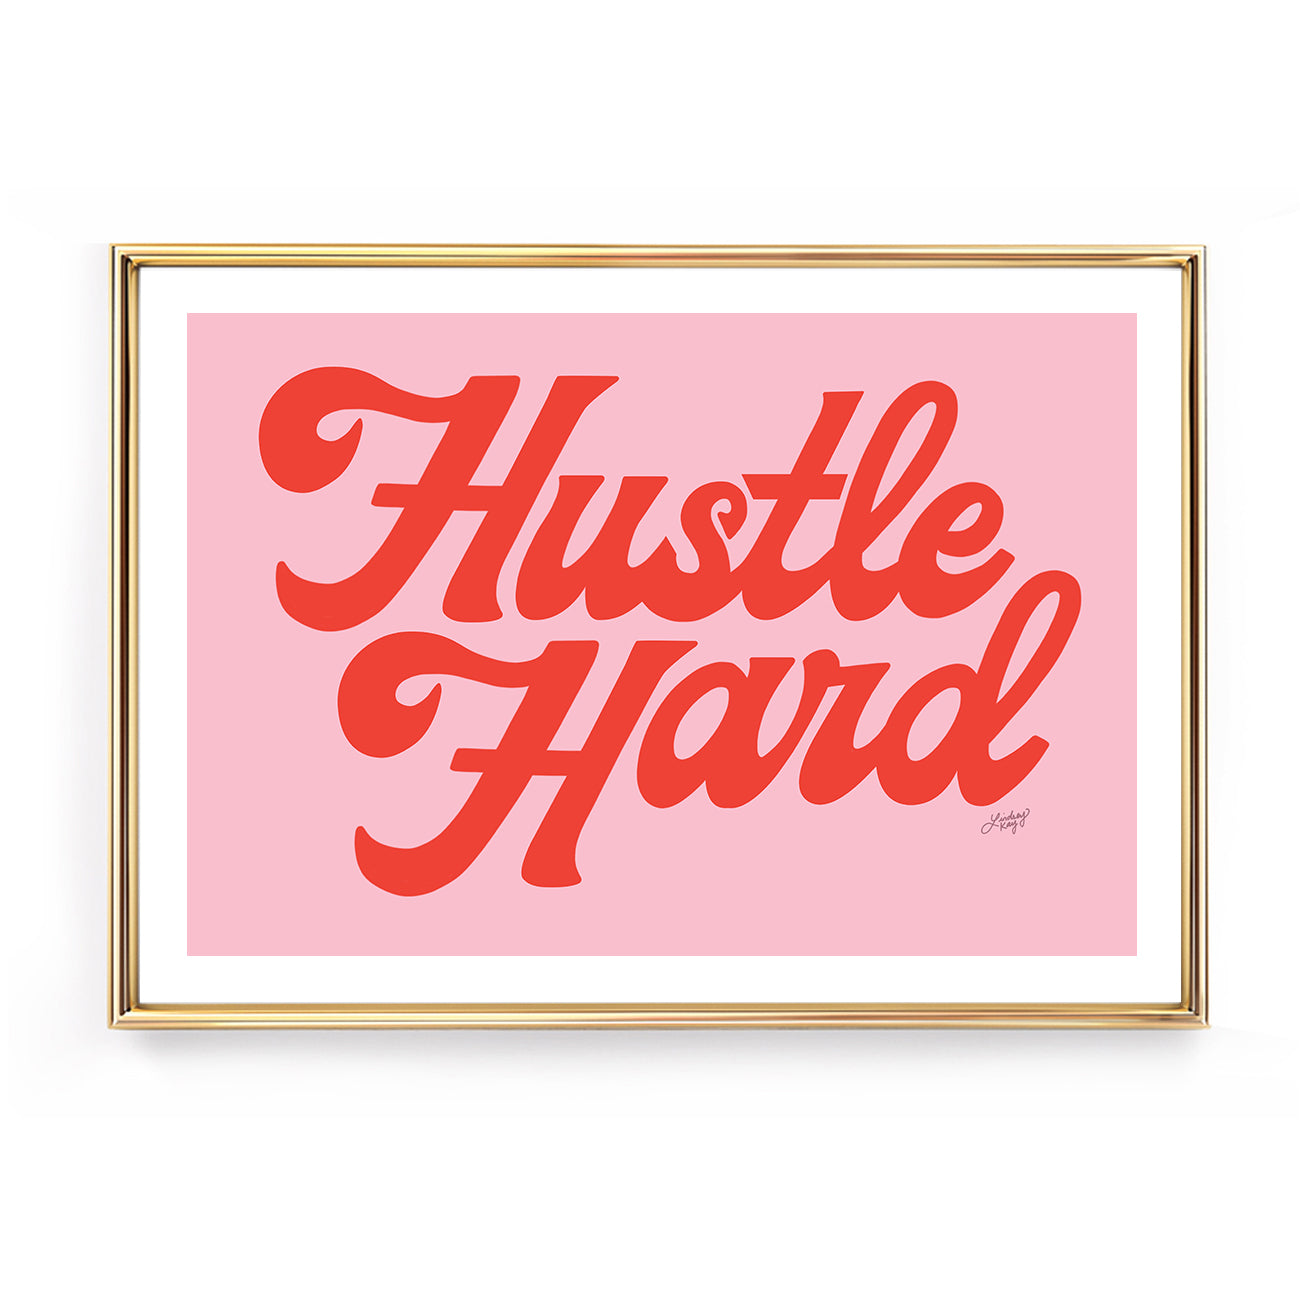 hustle hard quote retro hand lettering pink red poster motivational art print wall art lindsey kay collective